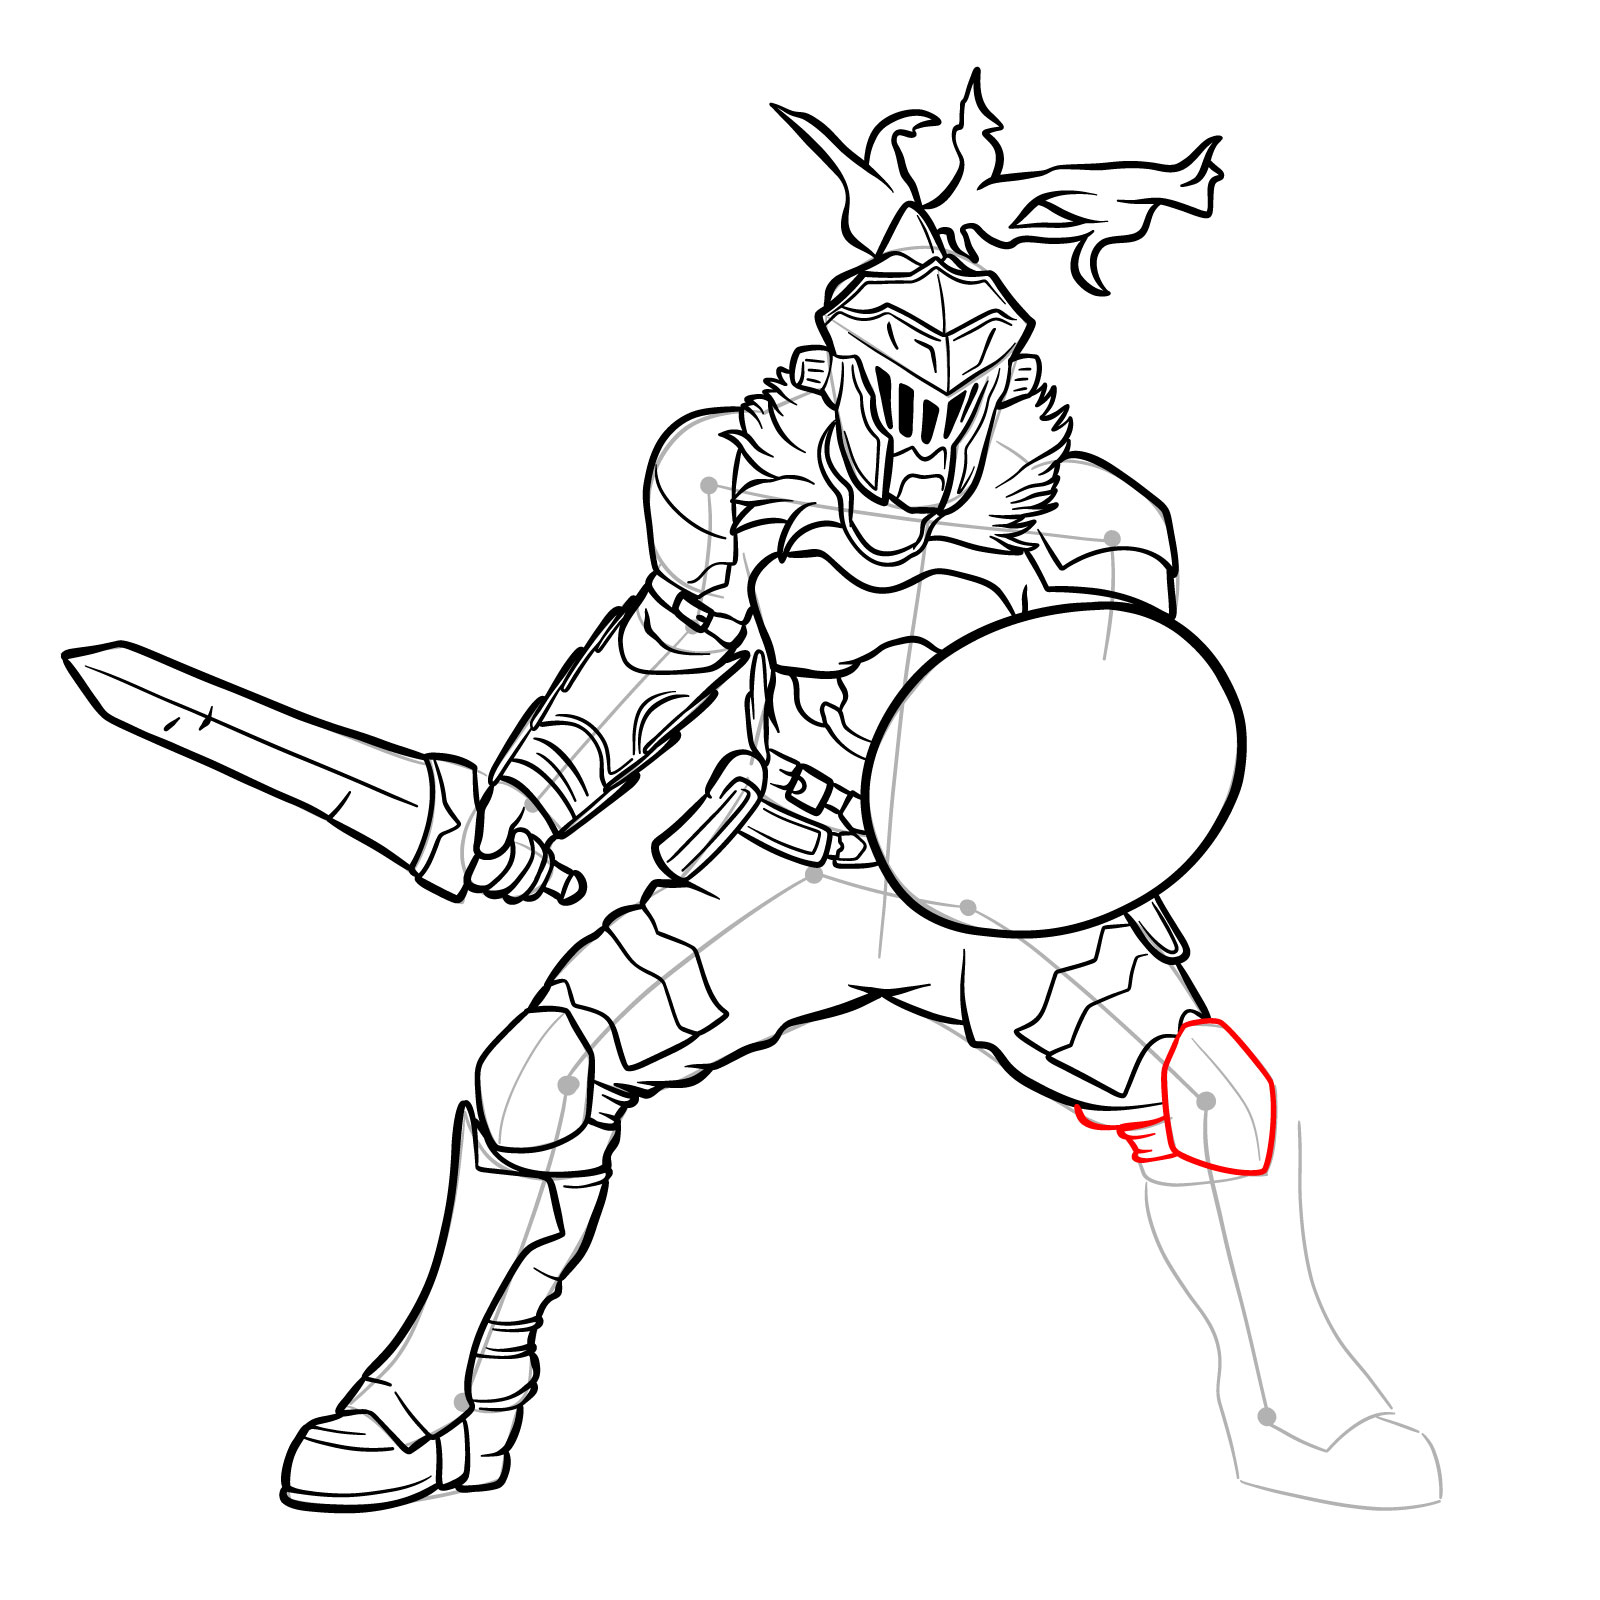 How to Draw Goblin Slayer in battle stance - step 34